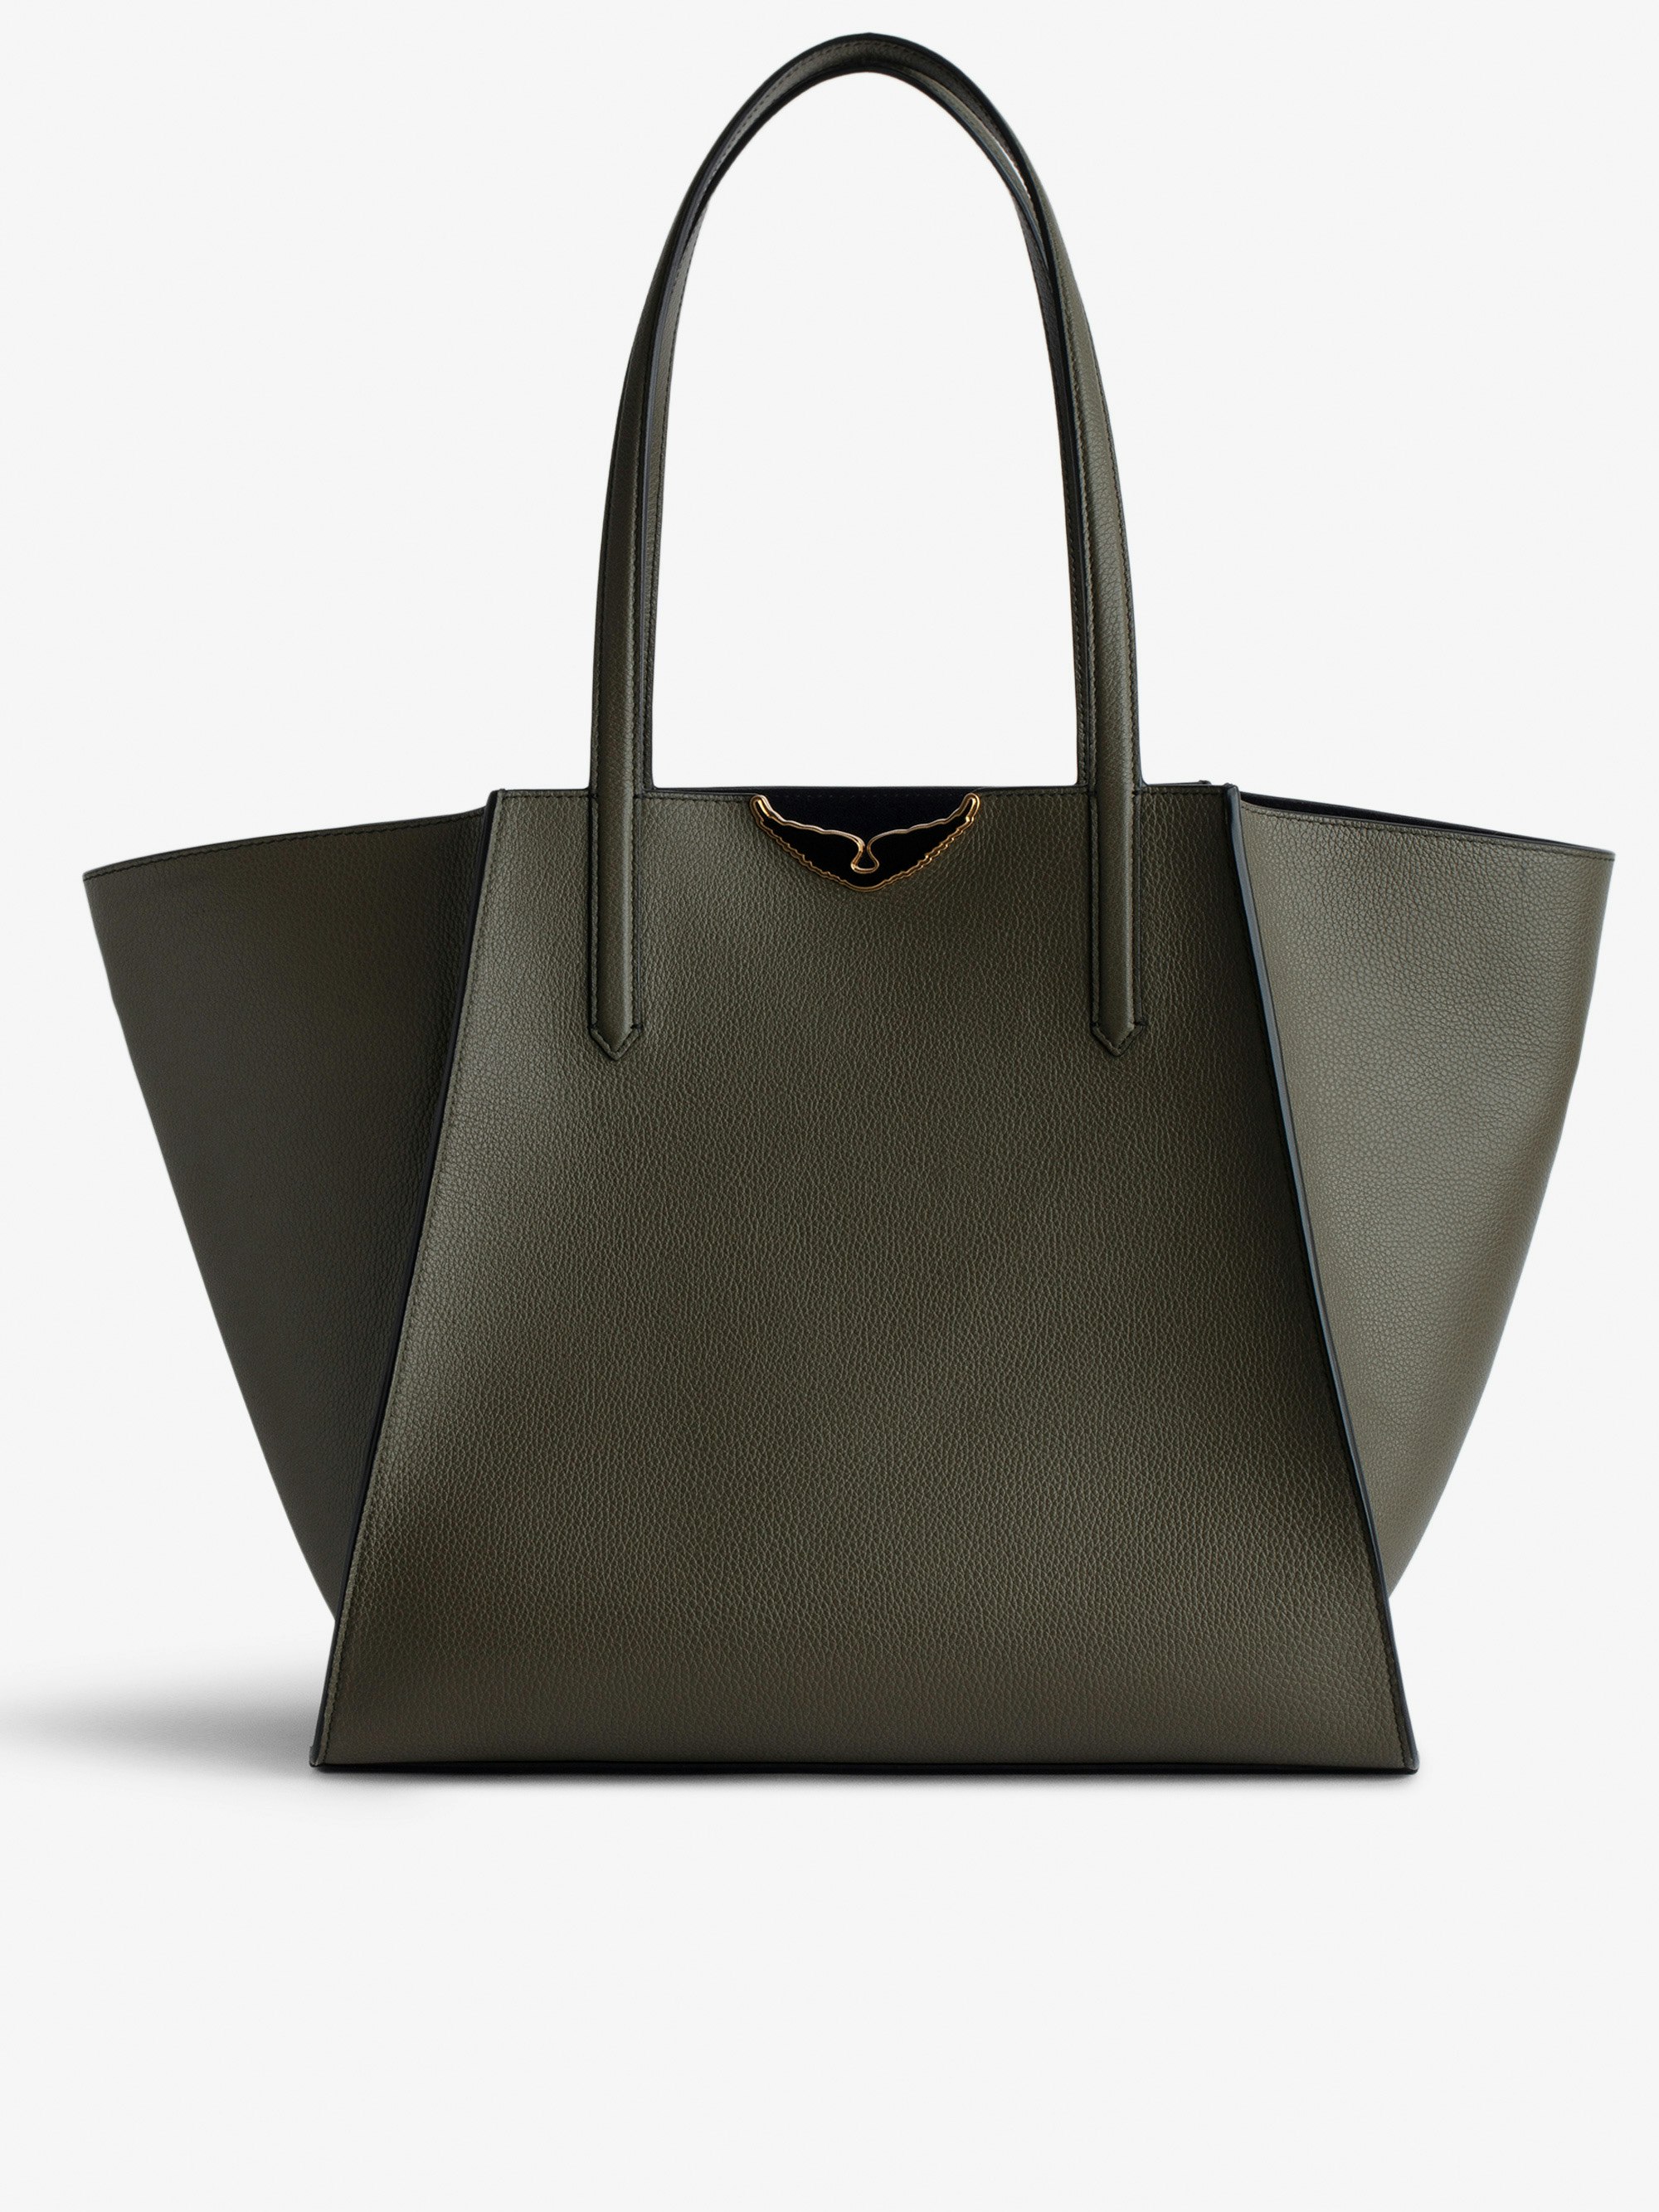 Le Borderline Bag - Women's khaki grained leather and navy blue suede tote bag with gold lacquered wings.